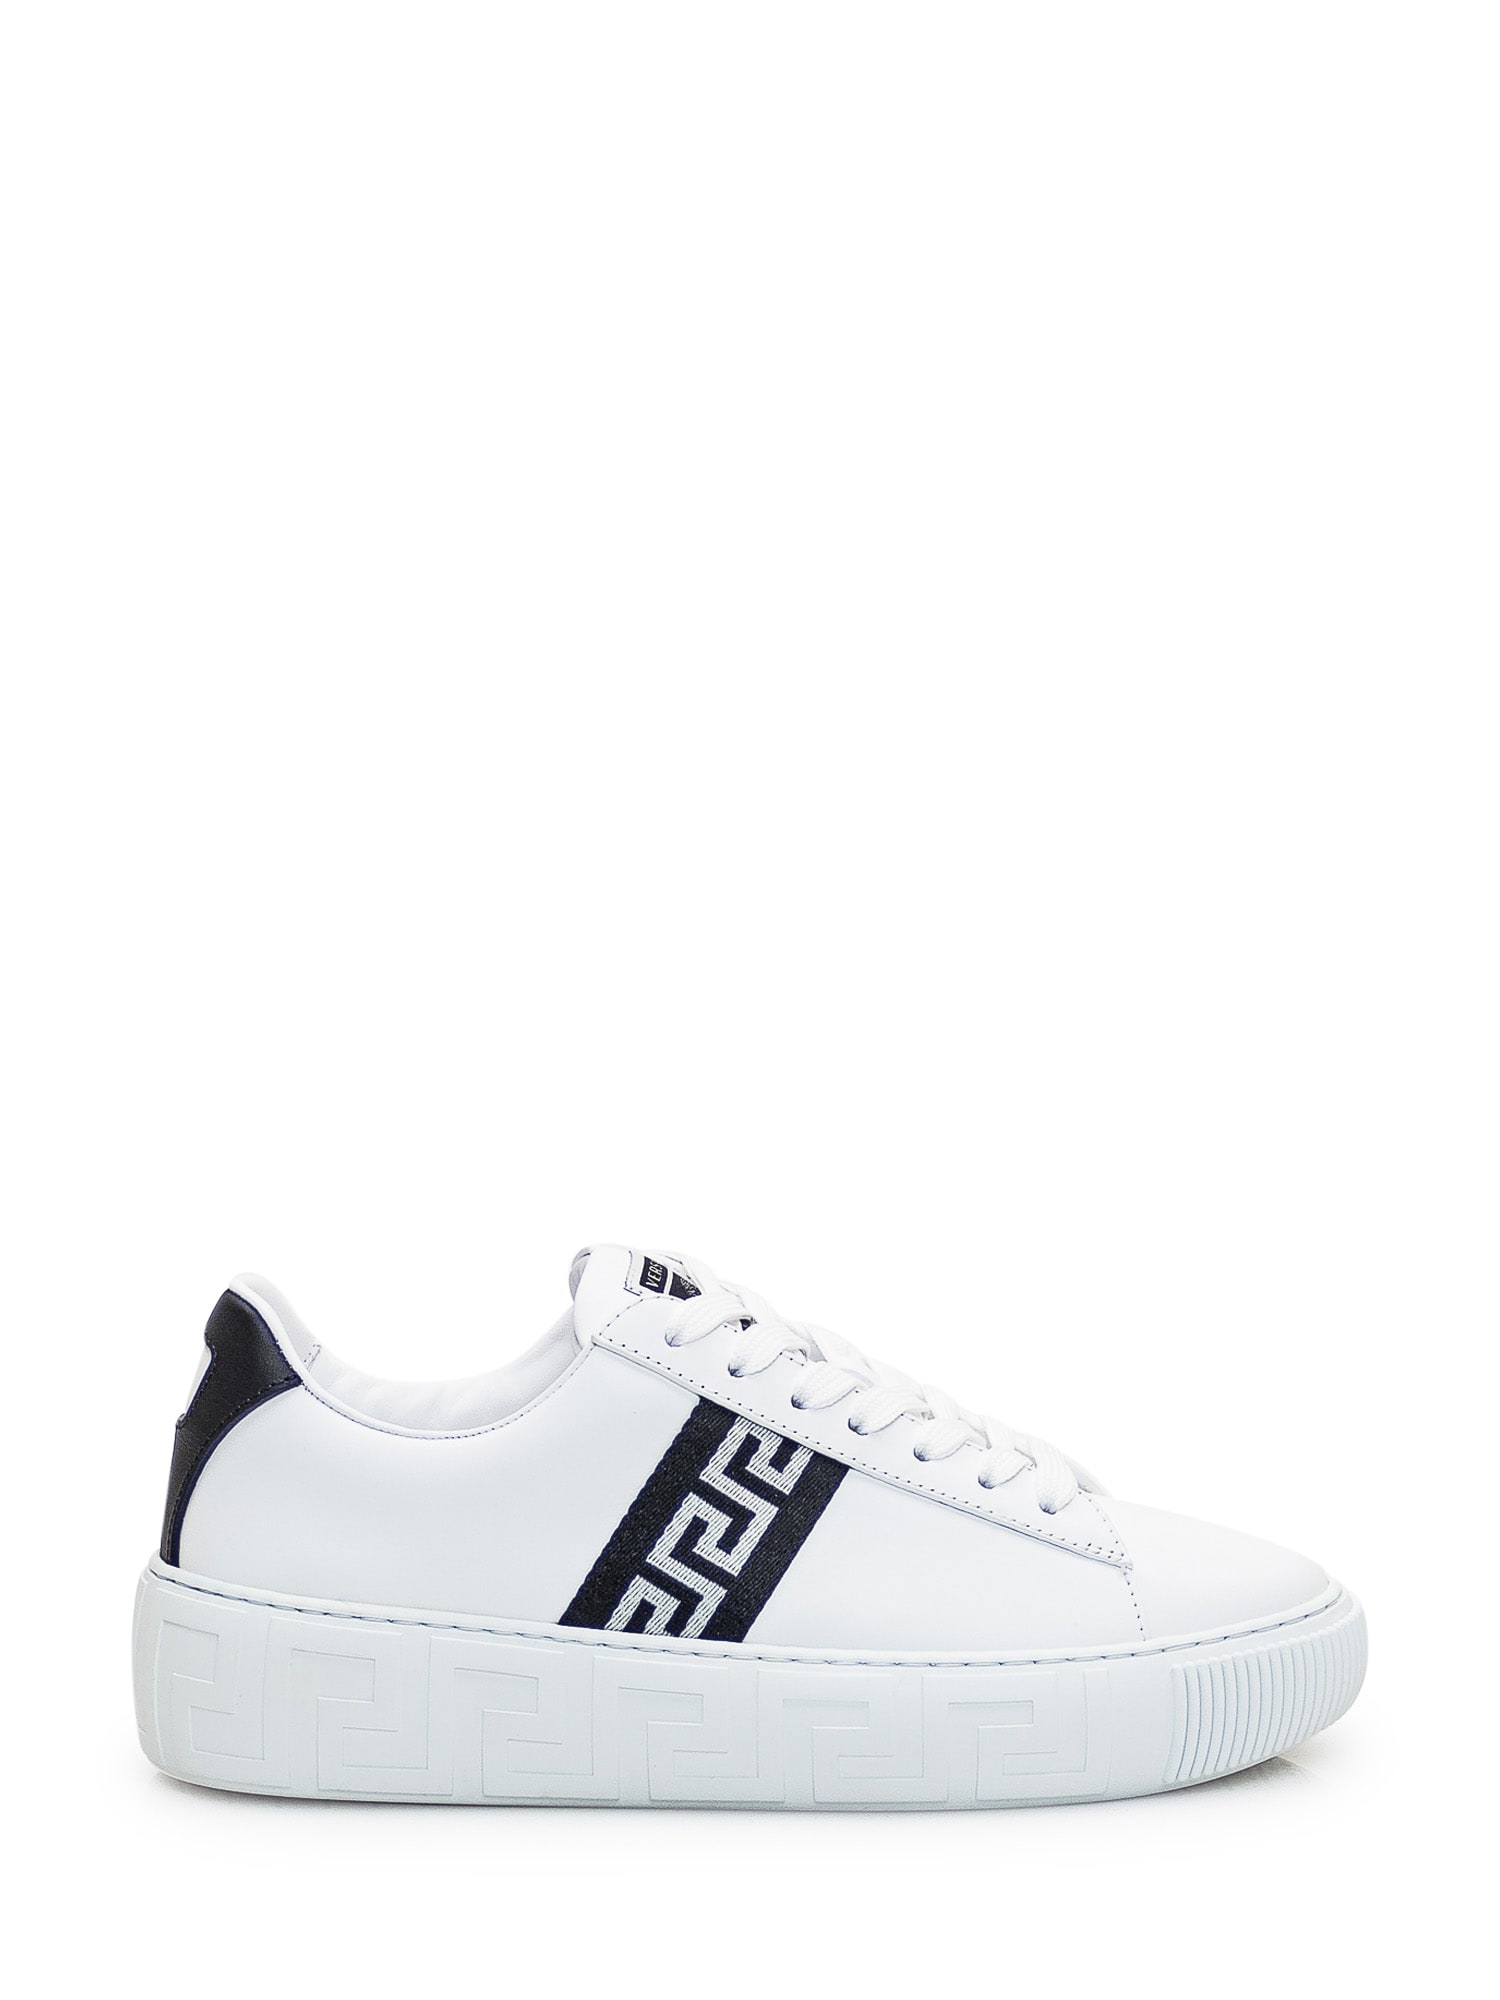 Greca-print Lace Up Sneakers